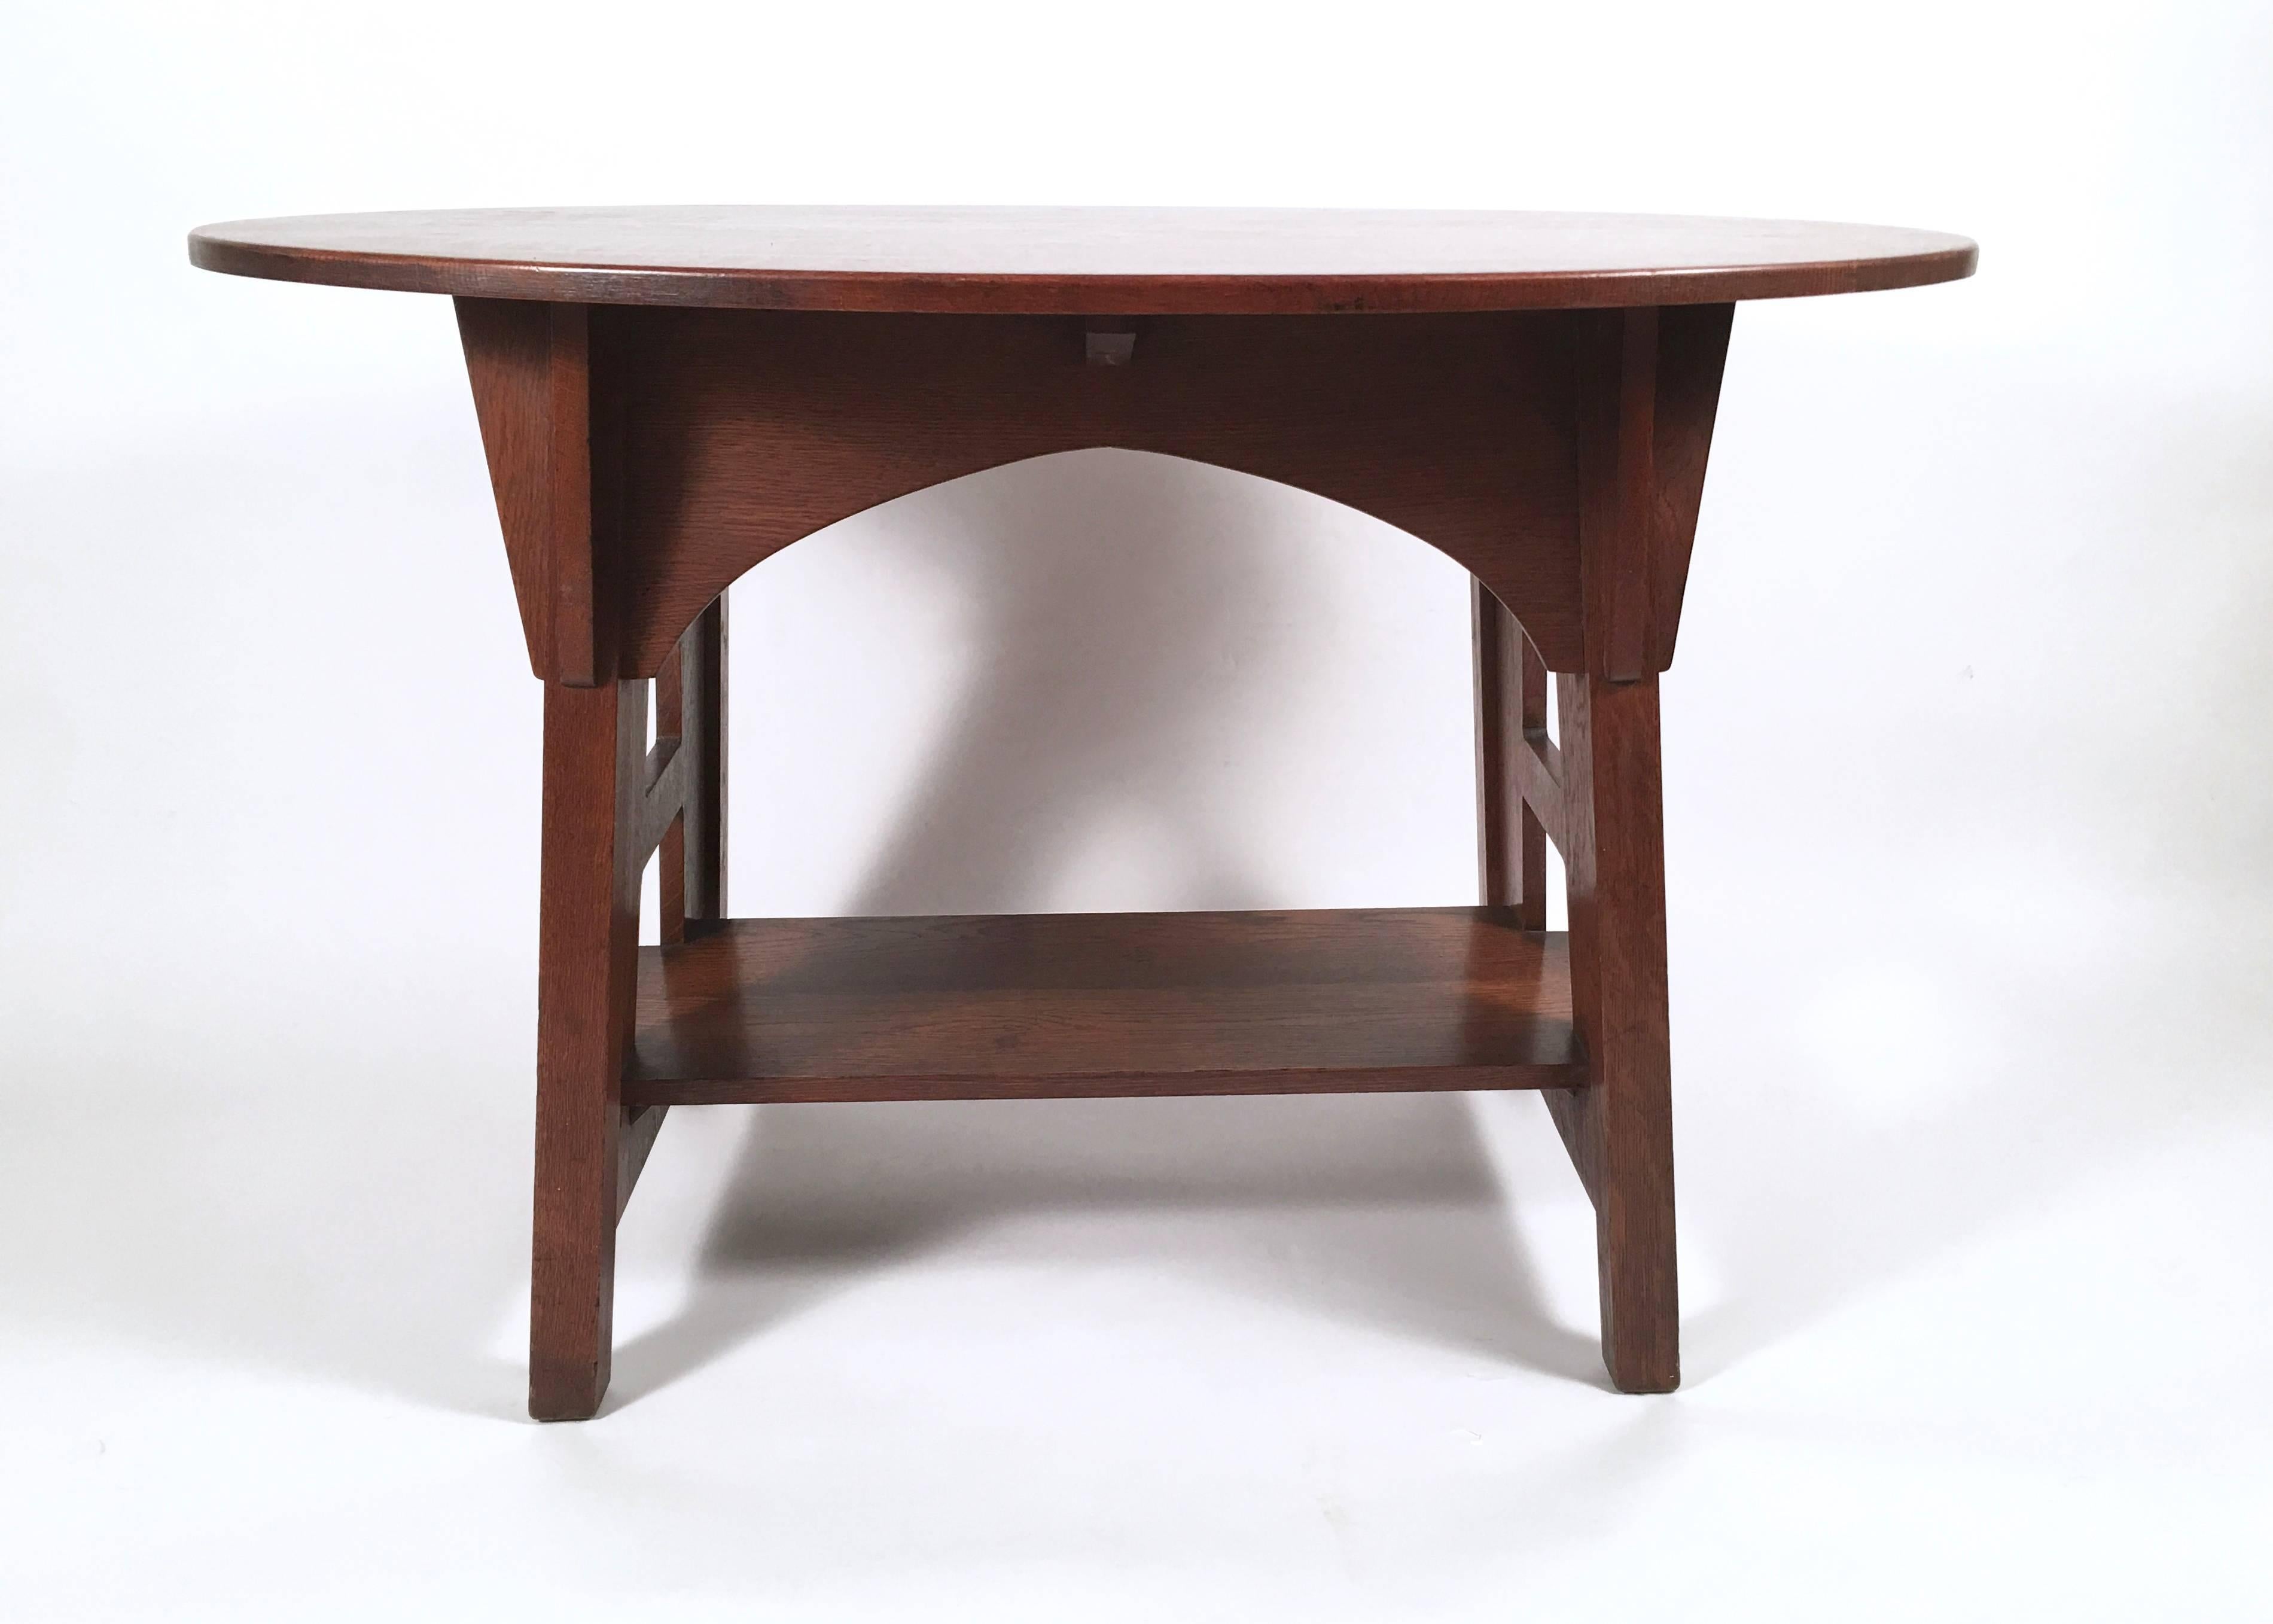 An Arts & Crafts period library table by Charles Limbert, No. 146, the oval top with lively figured boards of quarter sawn oak over an arcaded apron with bracket supports, flanked by trestle supports with square cut outs (influenced by the Viennese